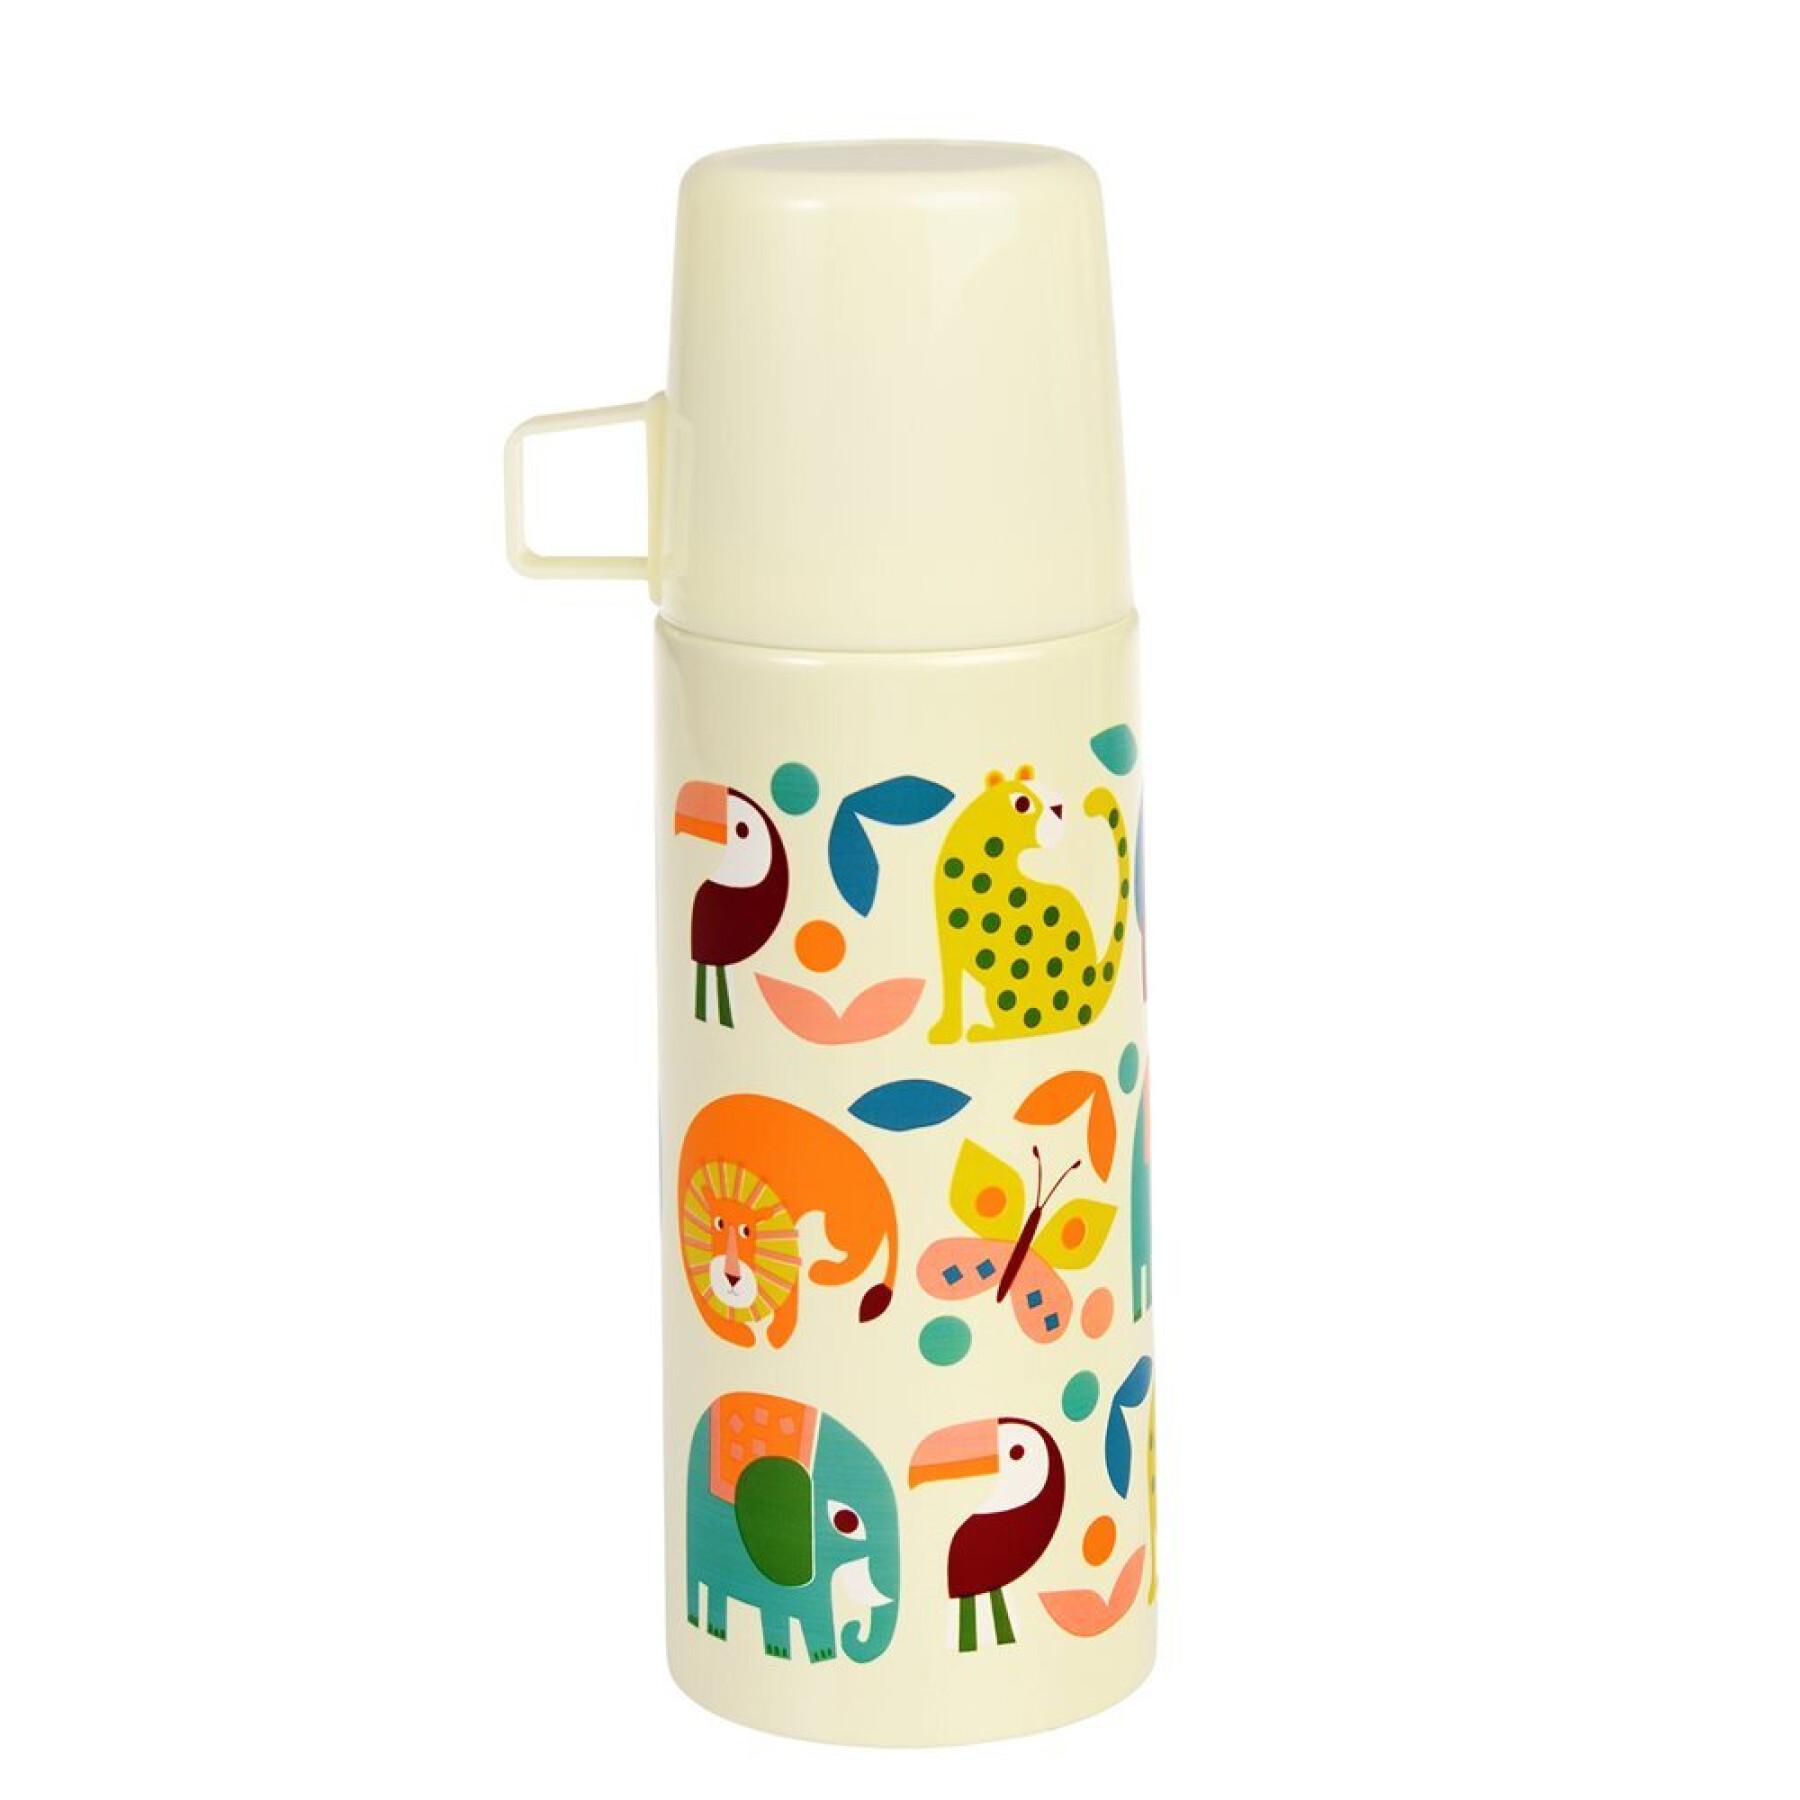 Childrens bottle and cup Rex London Wild Wonders